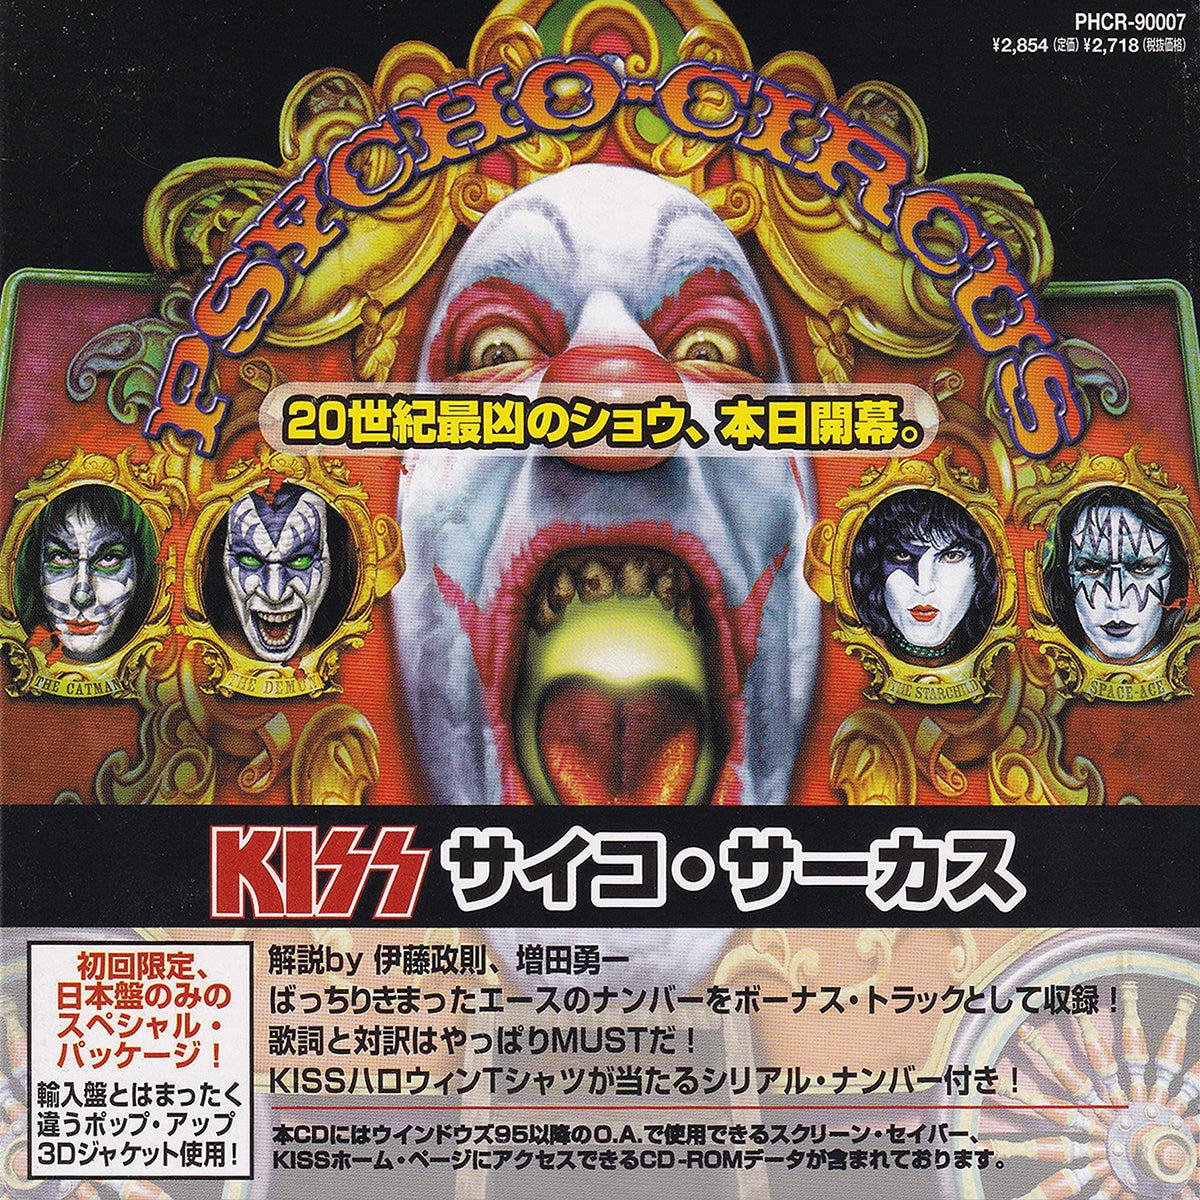 Japanese Psycho Circus CD With Store Display